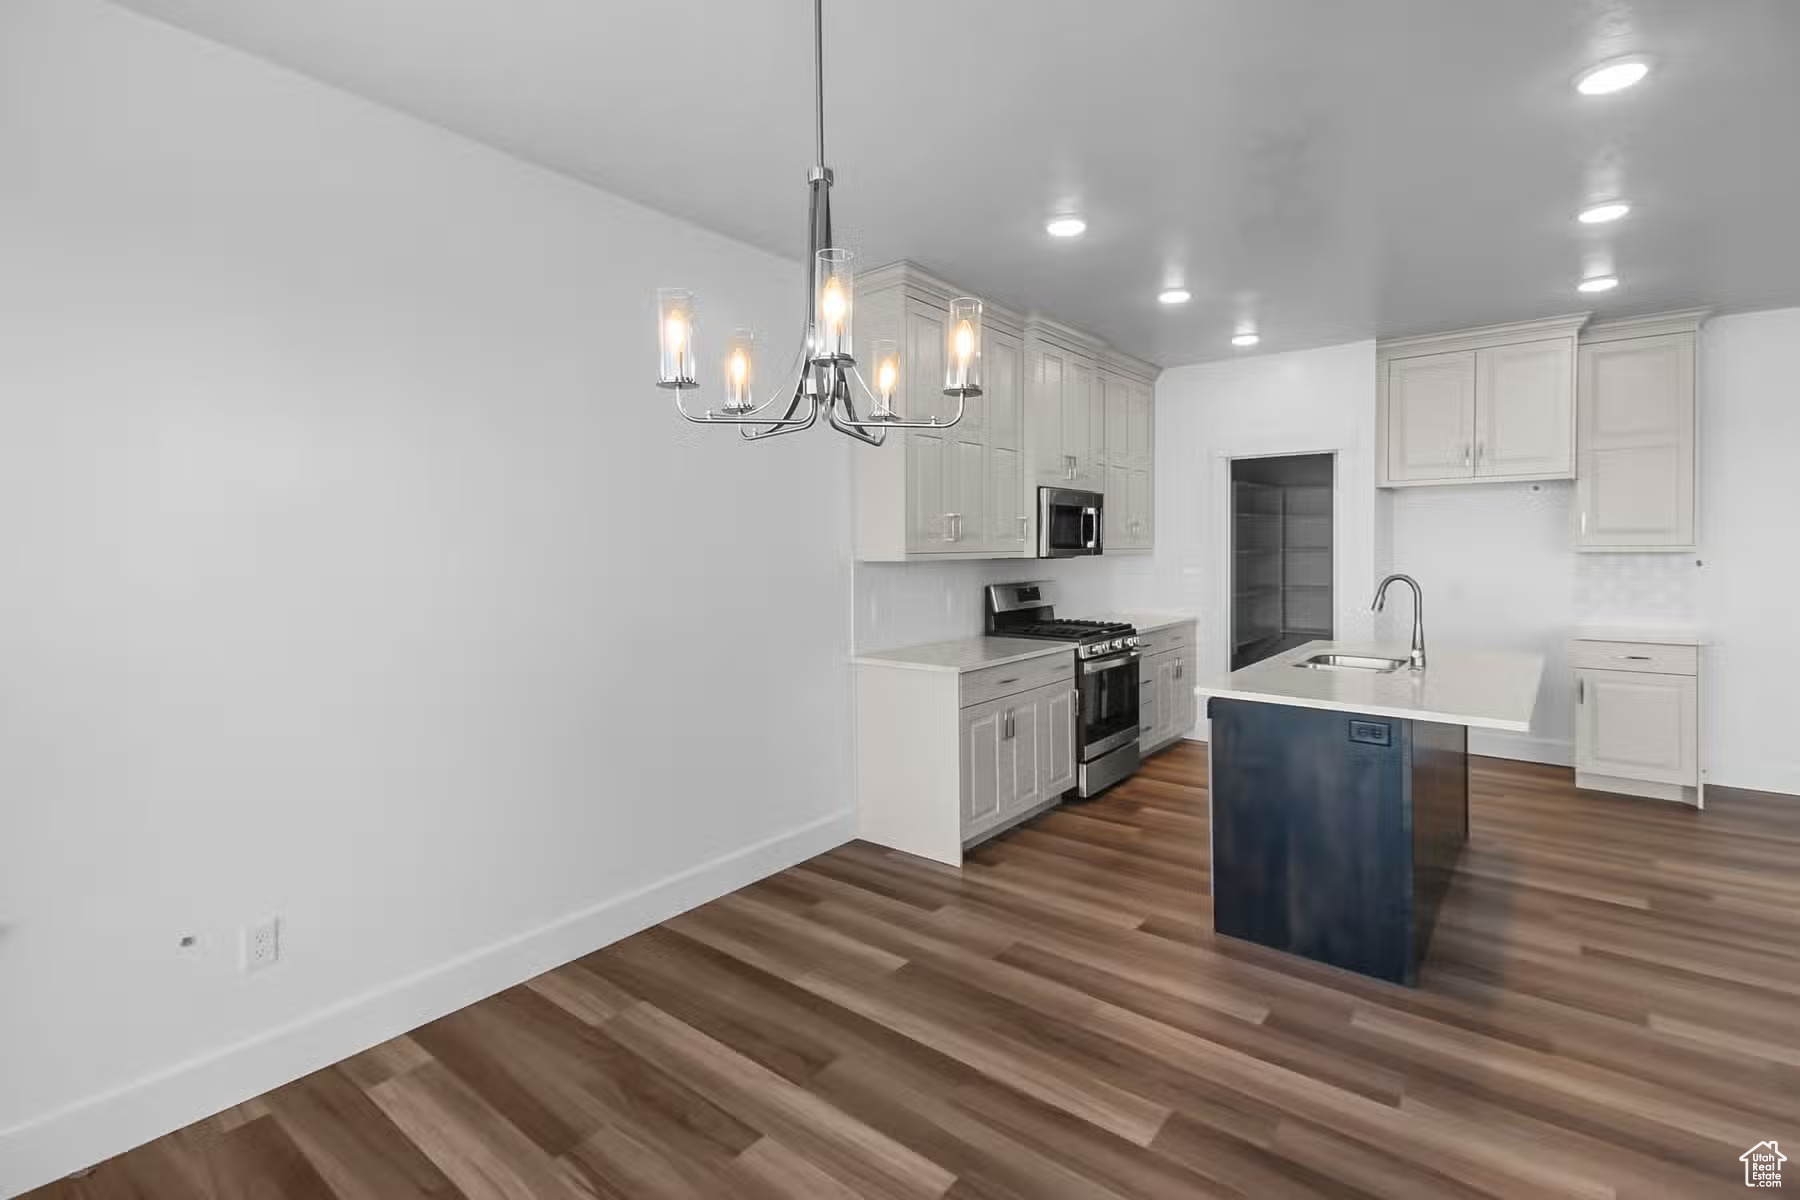 Kitchen with appliances with stainless steel finishes, pendant lighting, dark wood-type flooring, and a kitchen island with sink